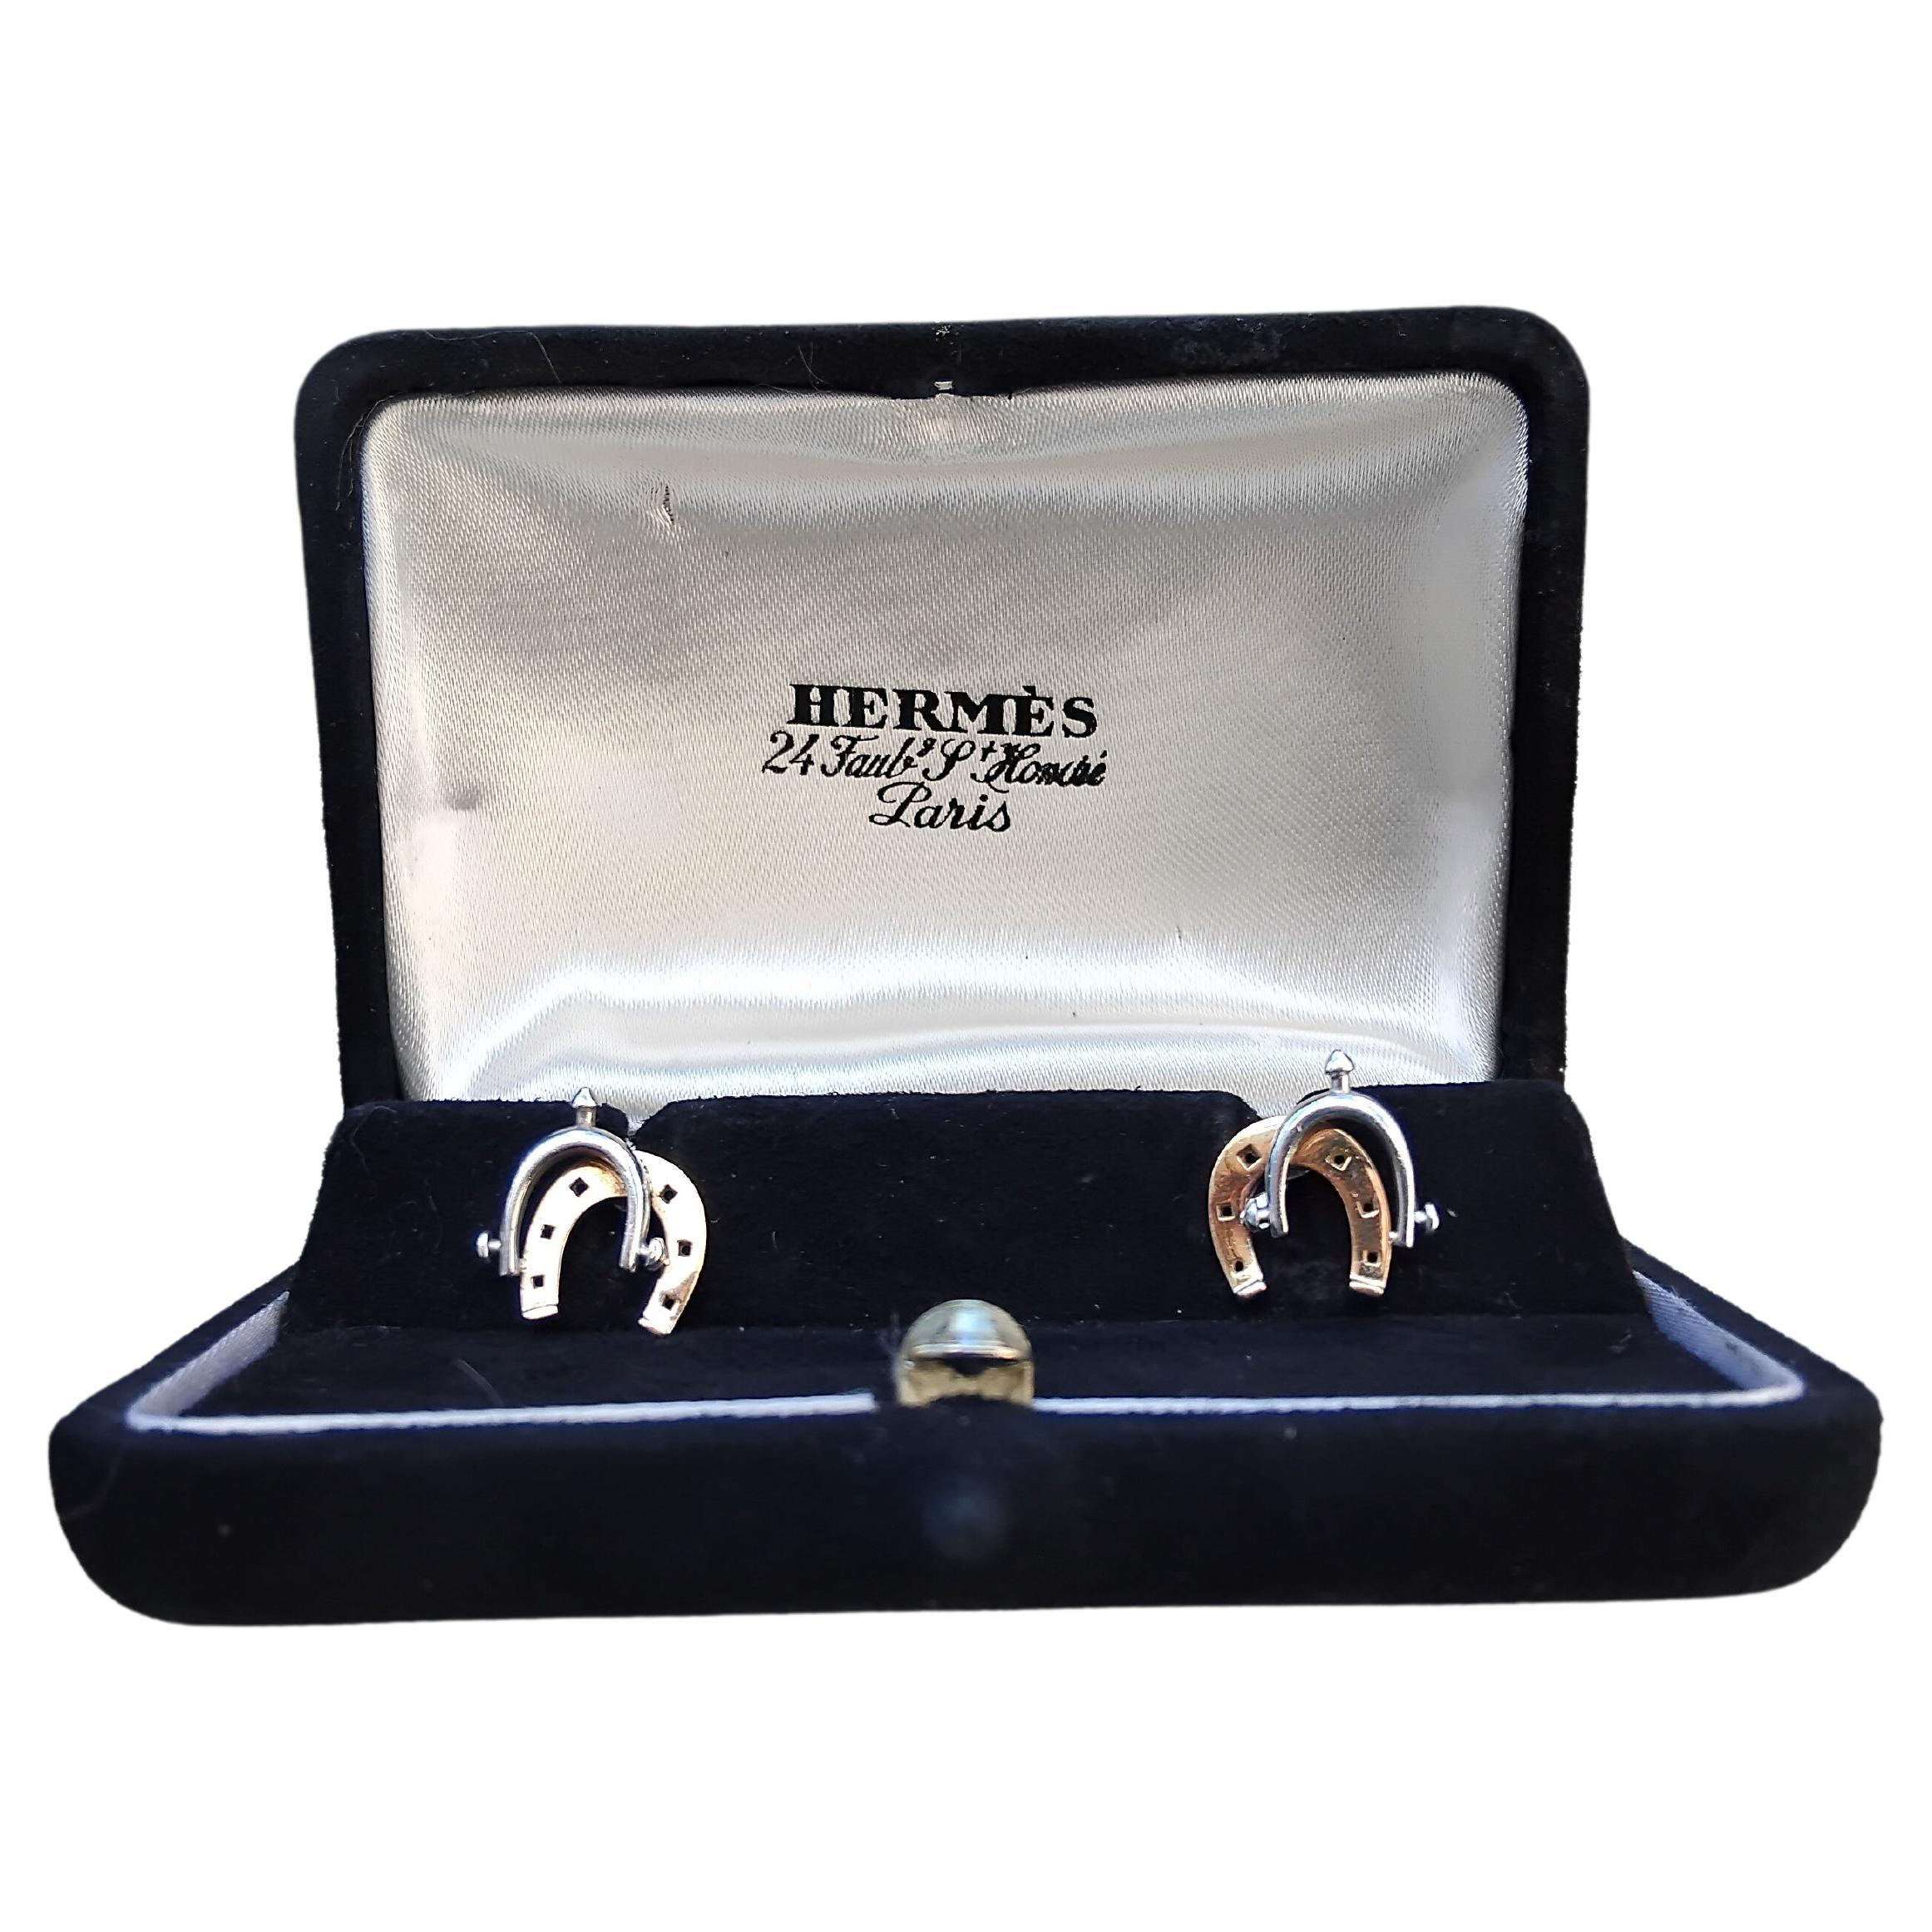 Rare and Gorgeous Authentic Hermès Cufflinks

Photos do not make justice to this exceptional pair of cufflinks. The two tone metal is super elegant, and their condition is rare for vintage items

Each one in the shape of a horseshoe and